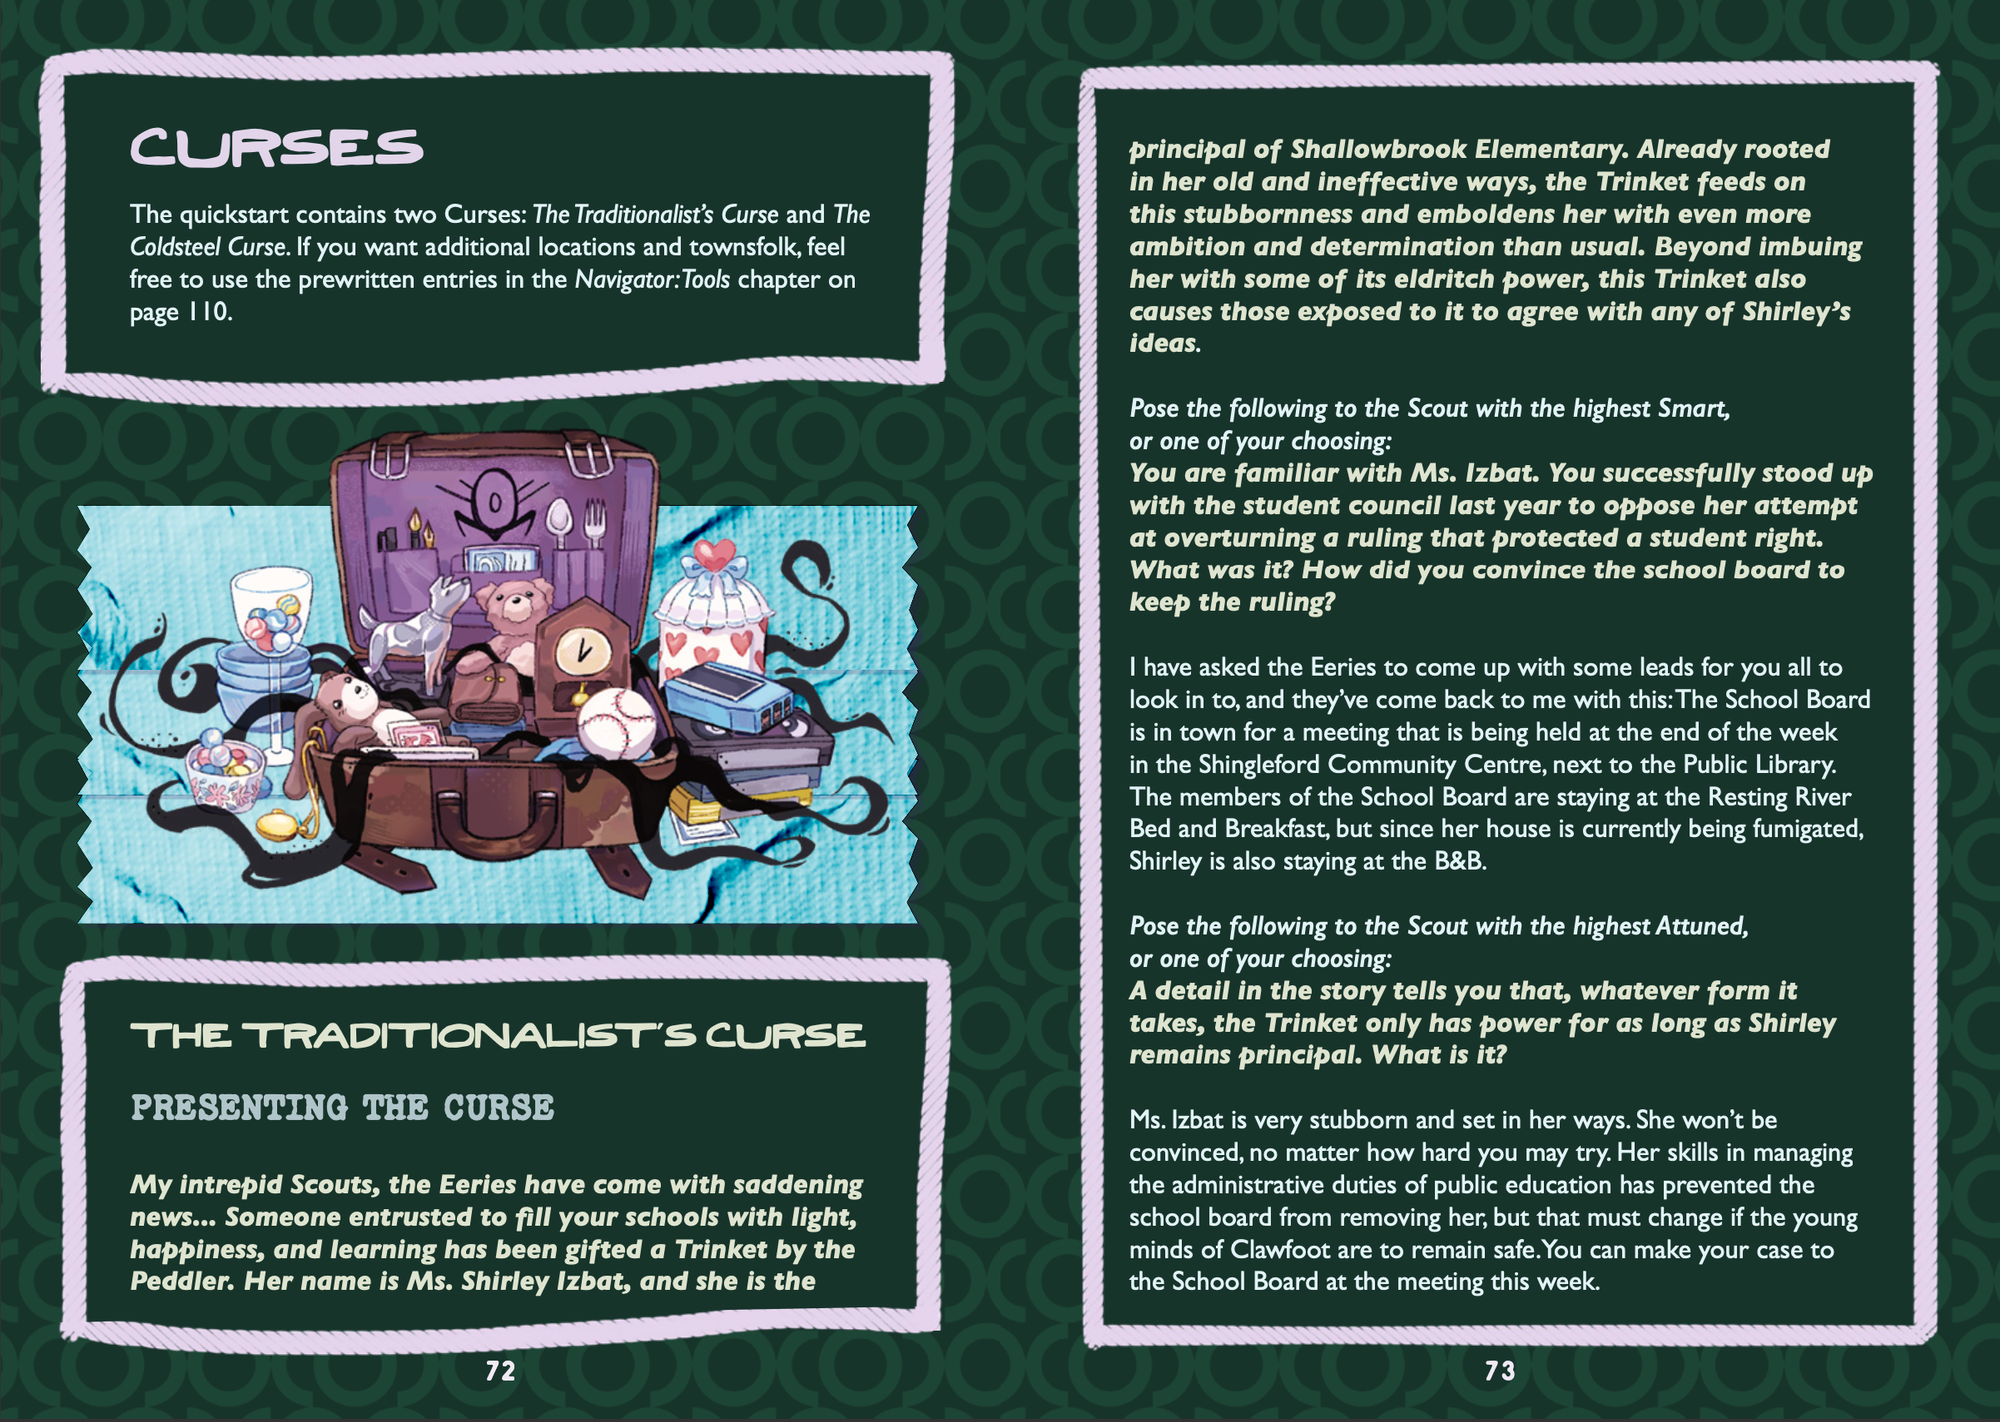 The quickstart for Cryptid Creeks is here!